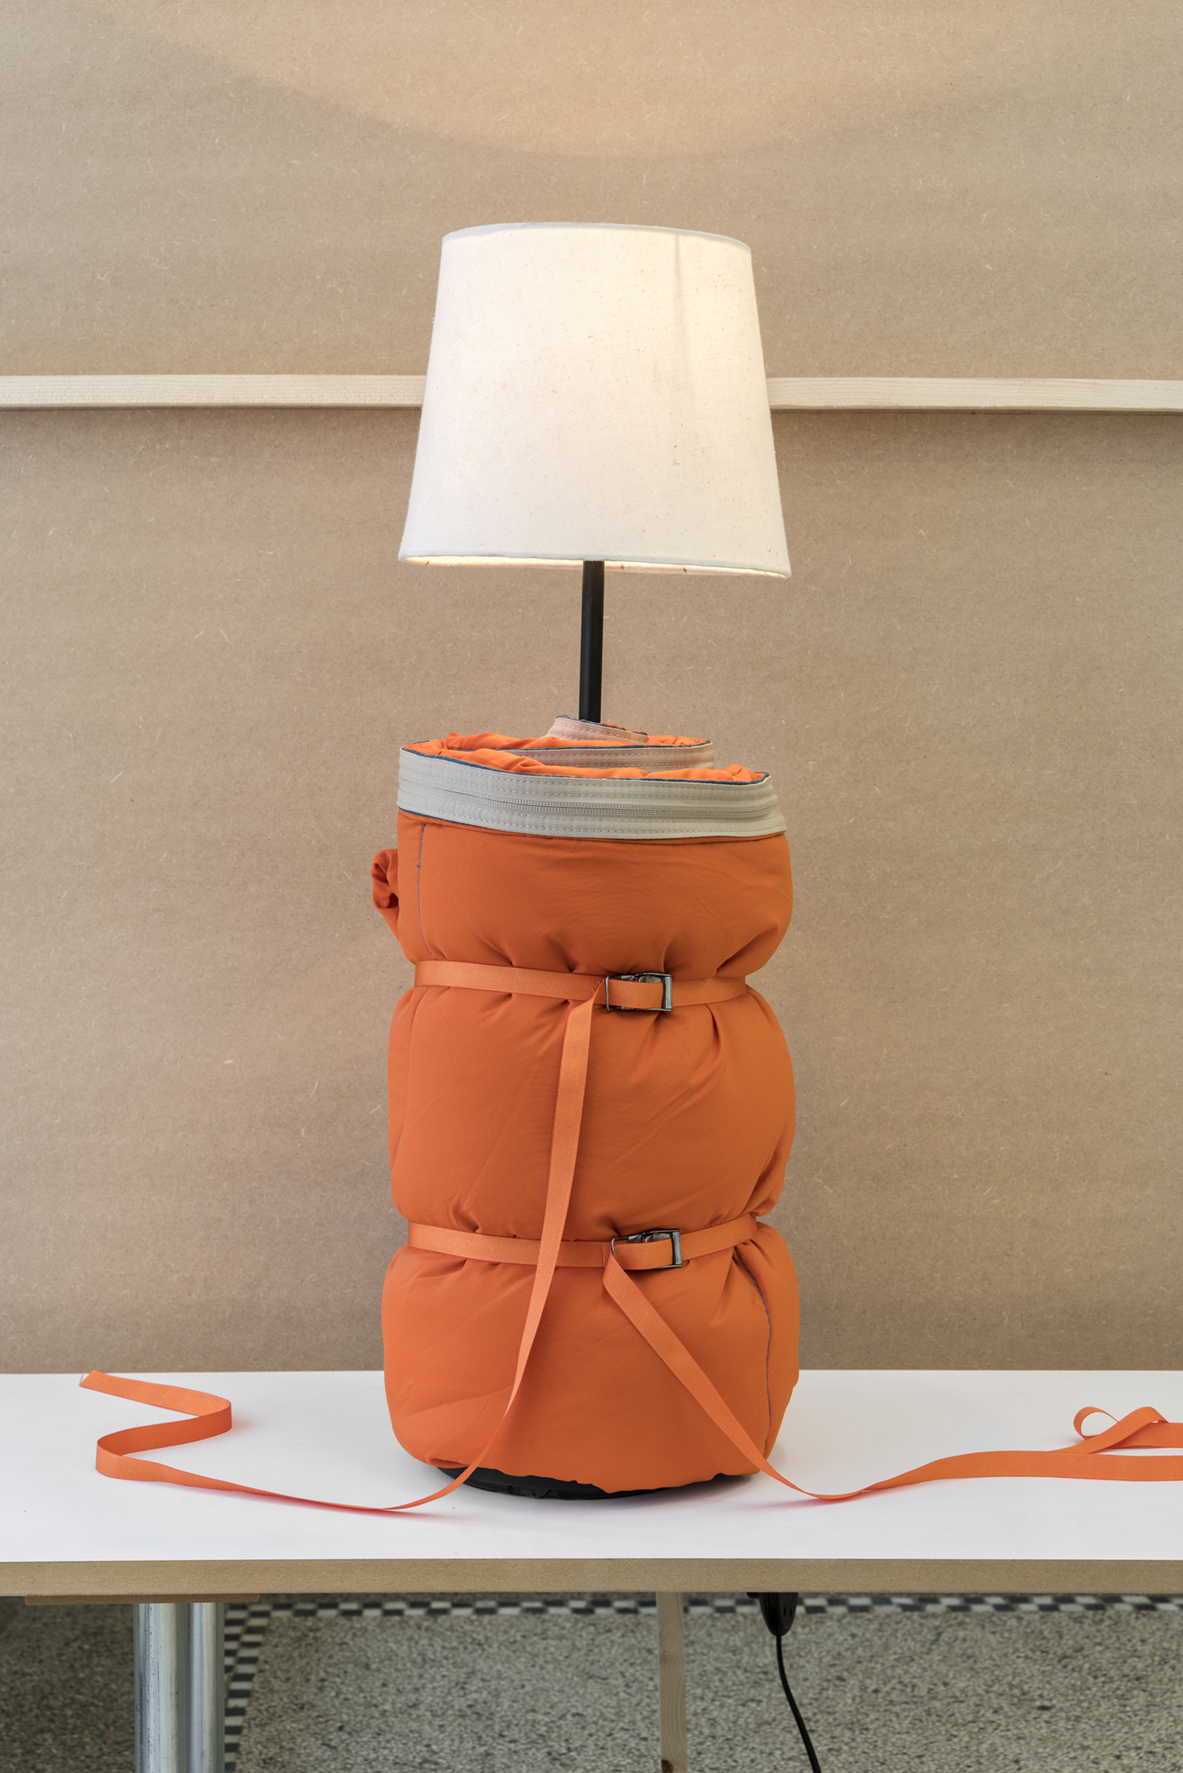 Kevin Gallagher Beacon, 2019 Standing lamp, sleeping bag, shipping straps, lamp shade, lightbulb